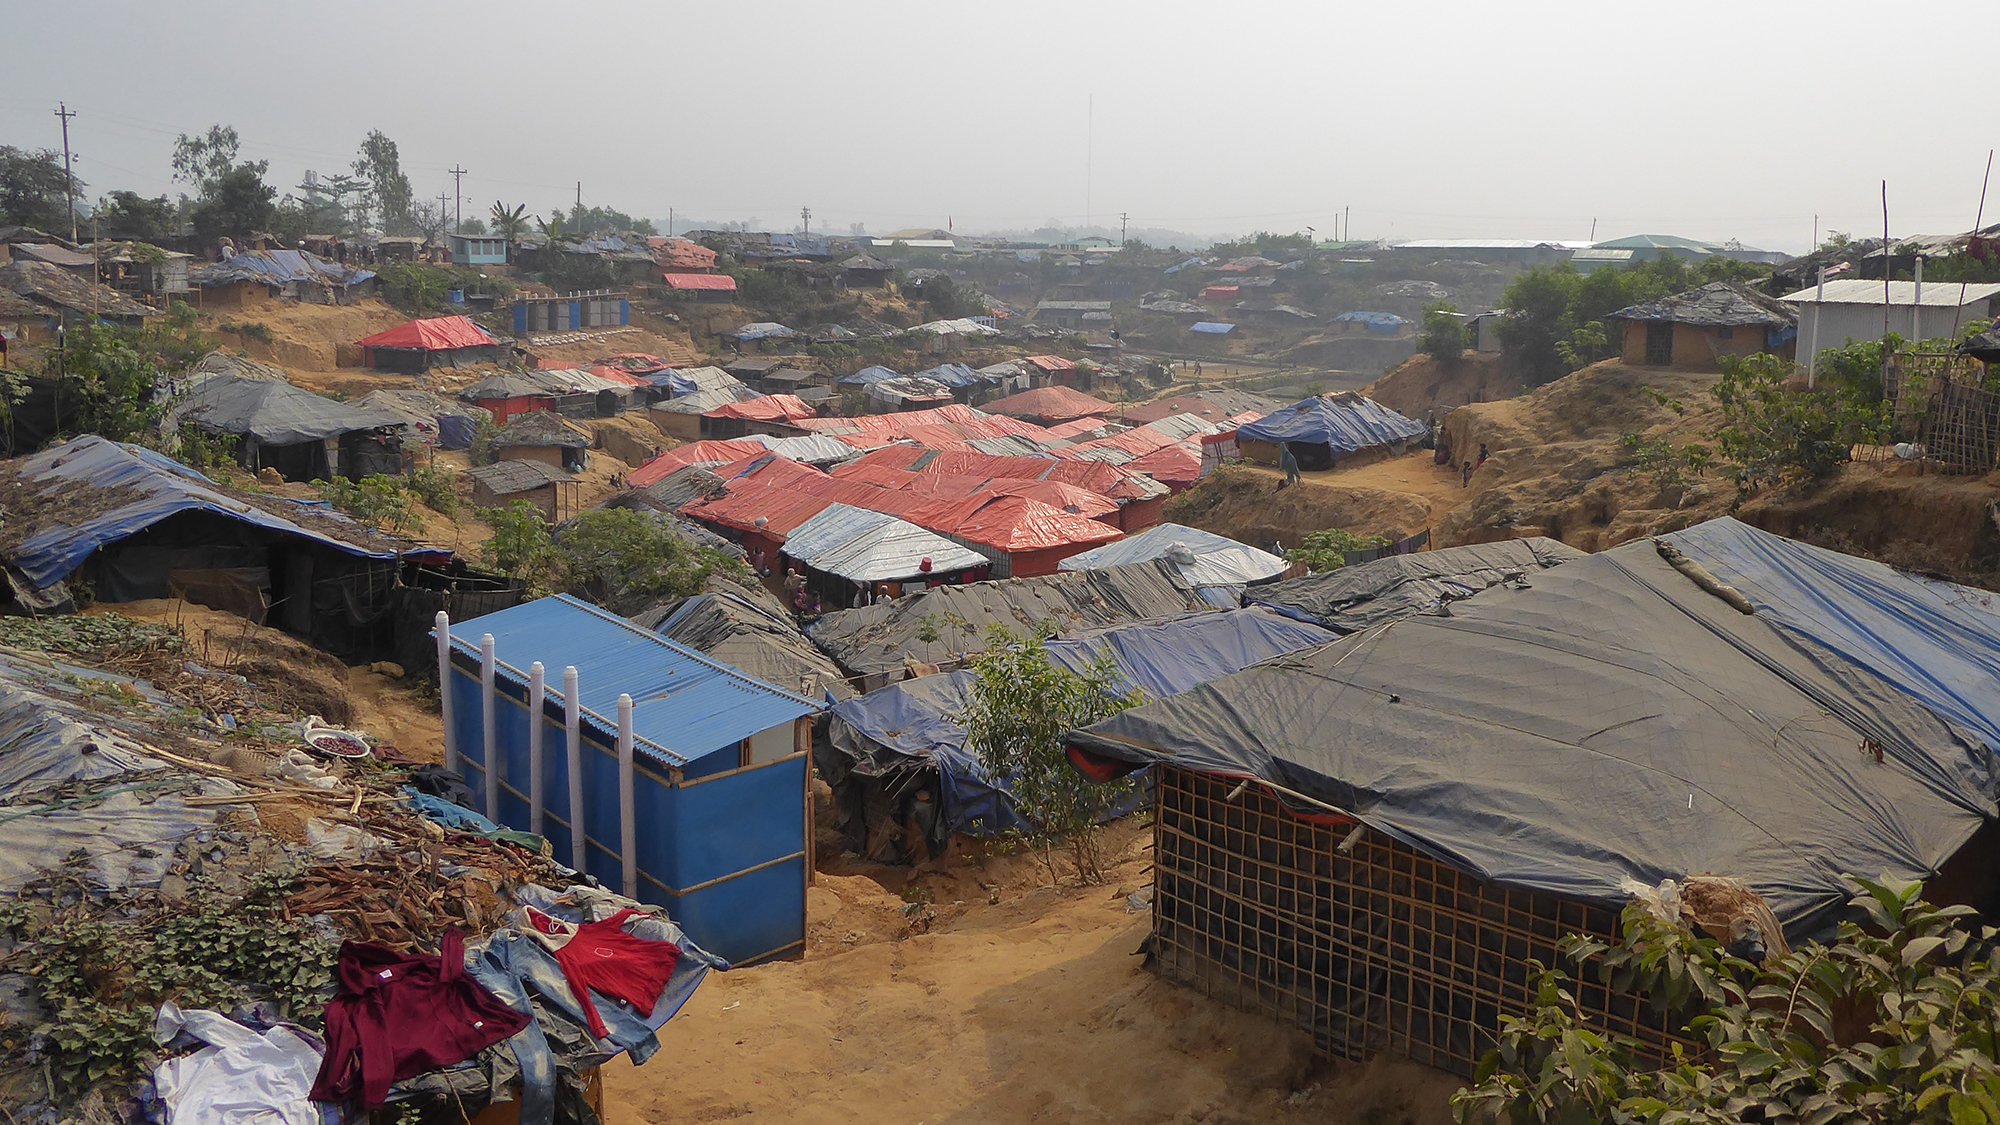 General view of the largest Rohingya refugee camp in Bangladesh